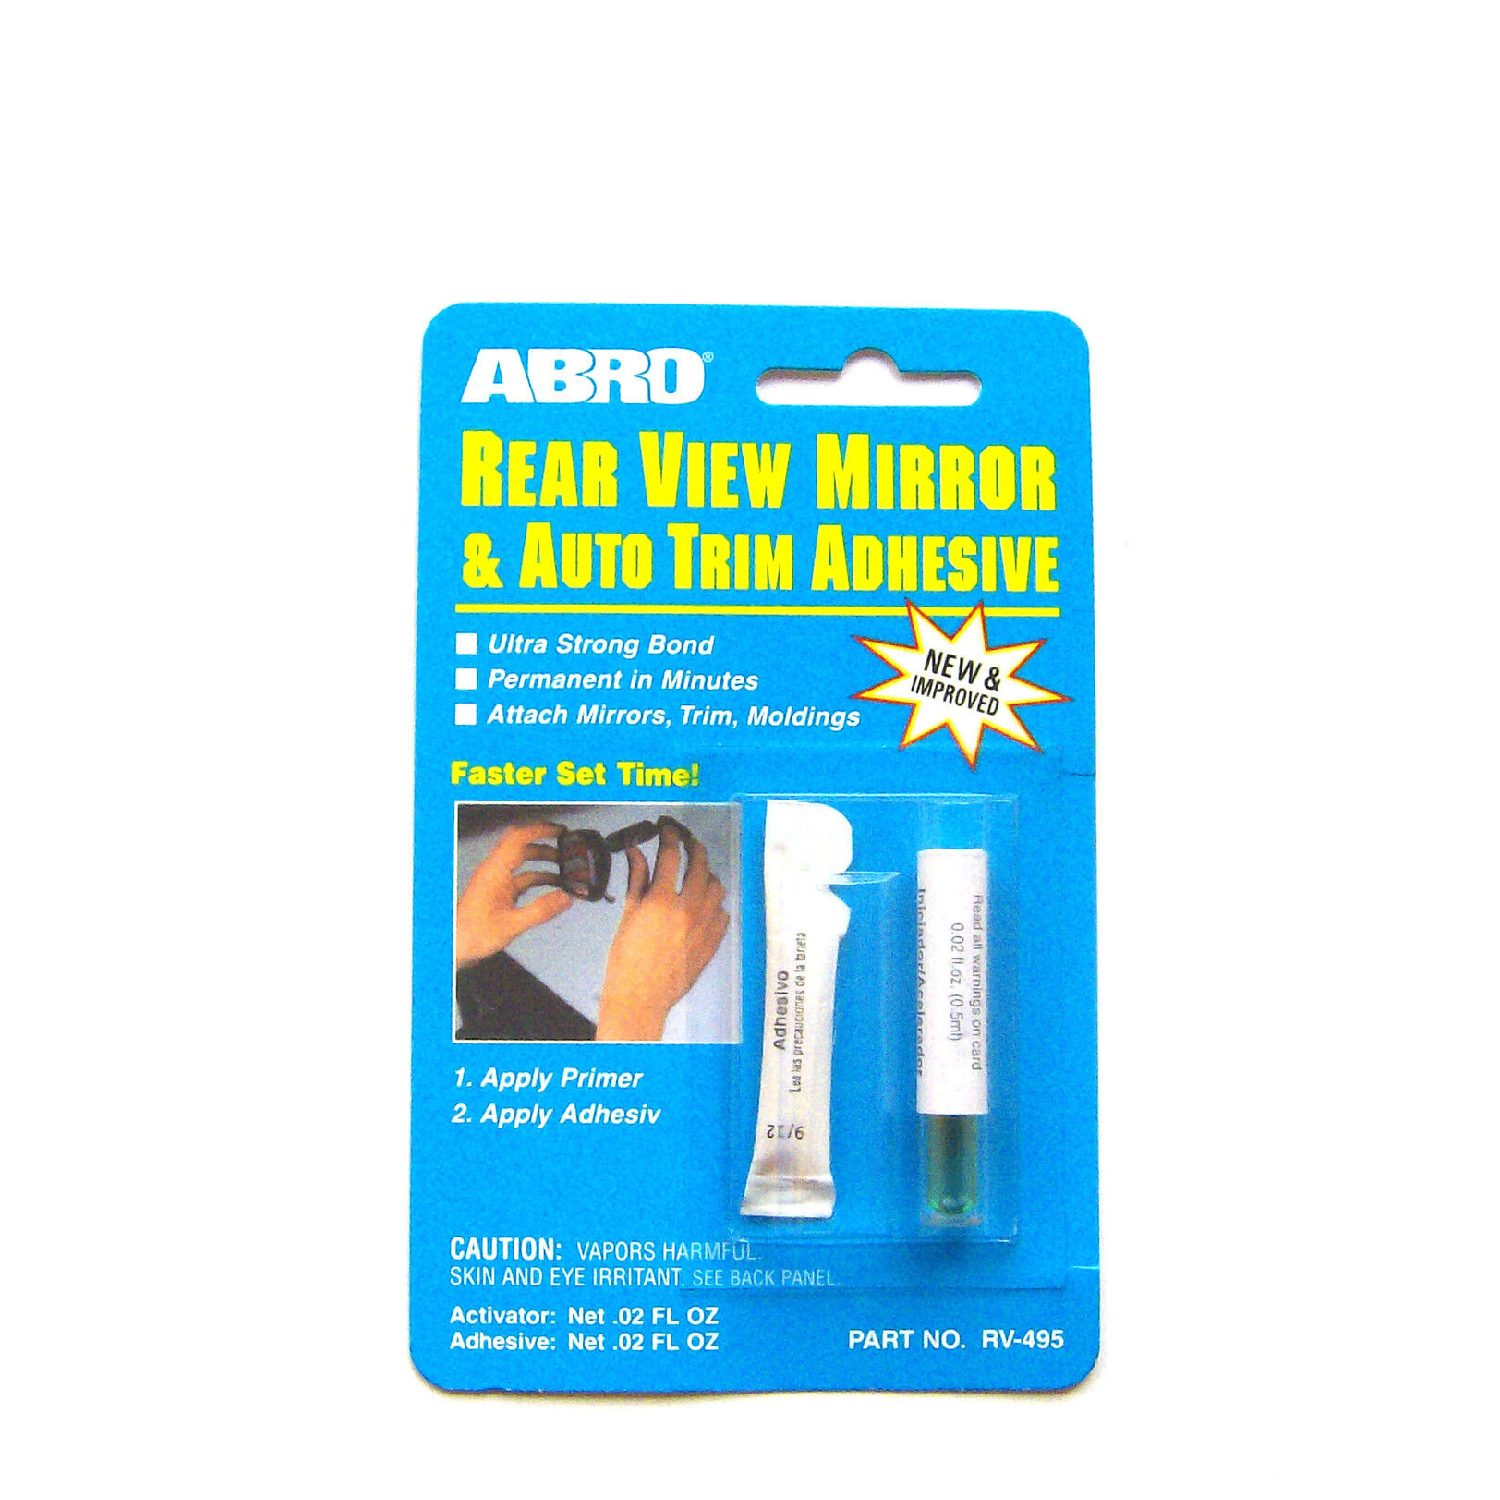 Rearview Mirror Adhesive, Clear, 0.02 oz, Tube